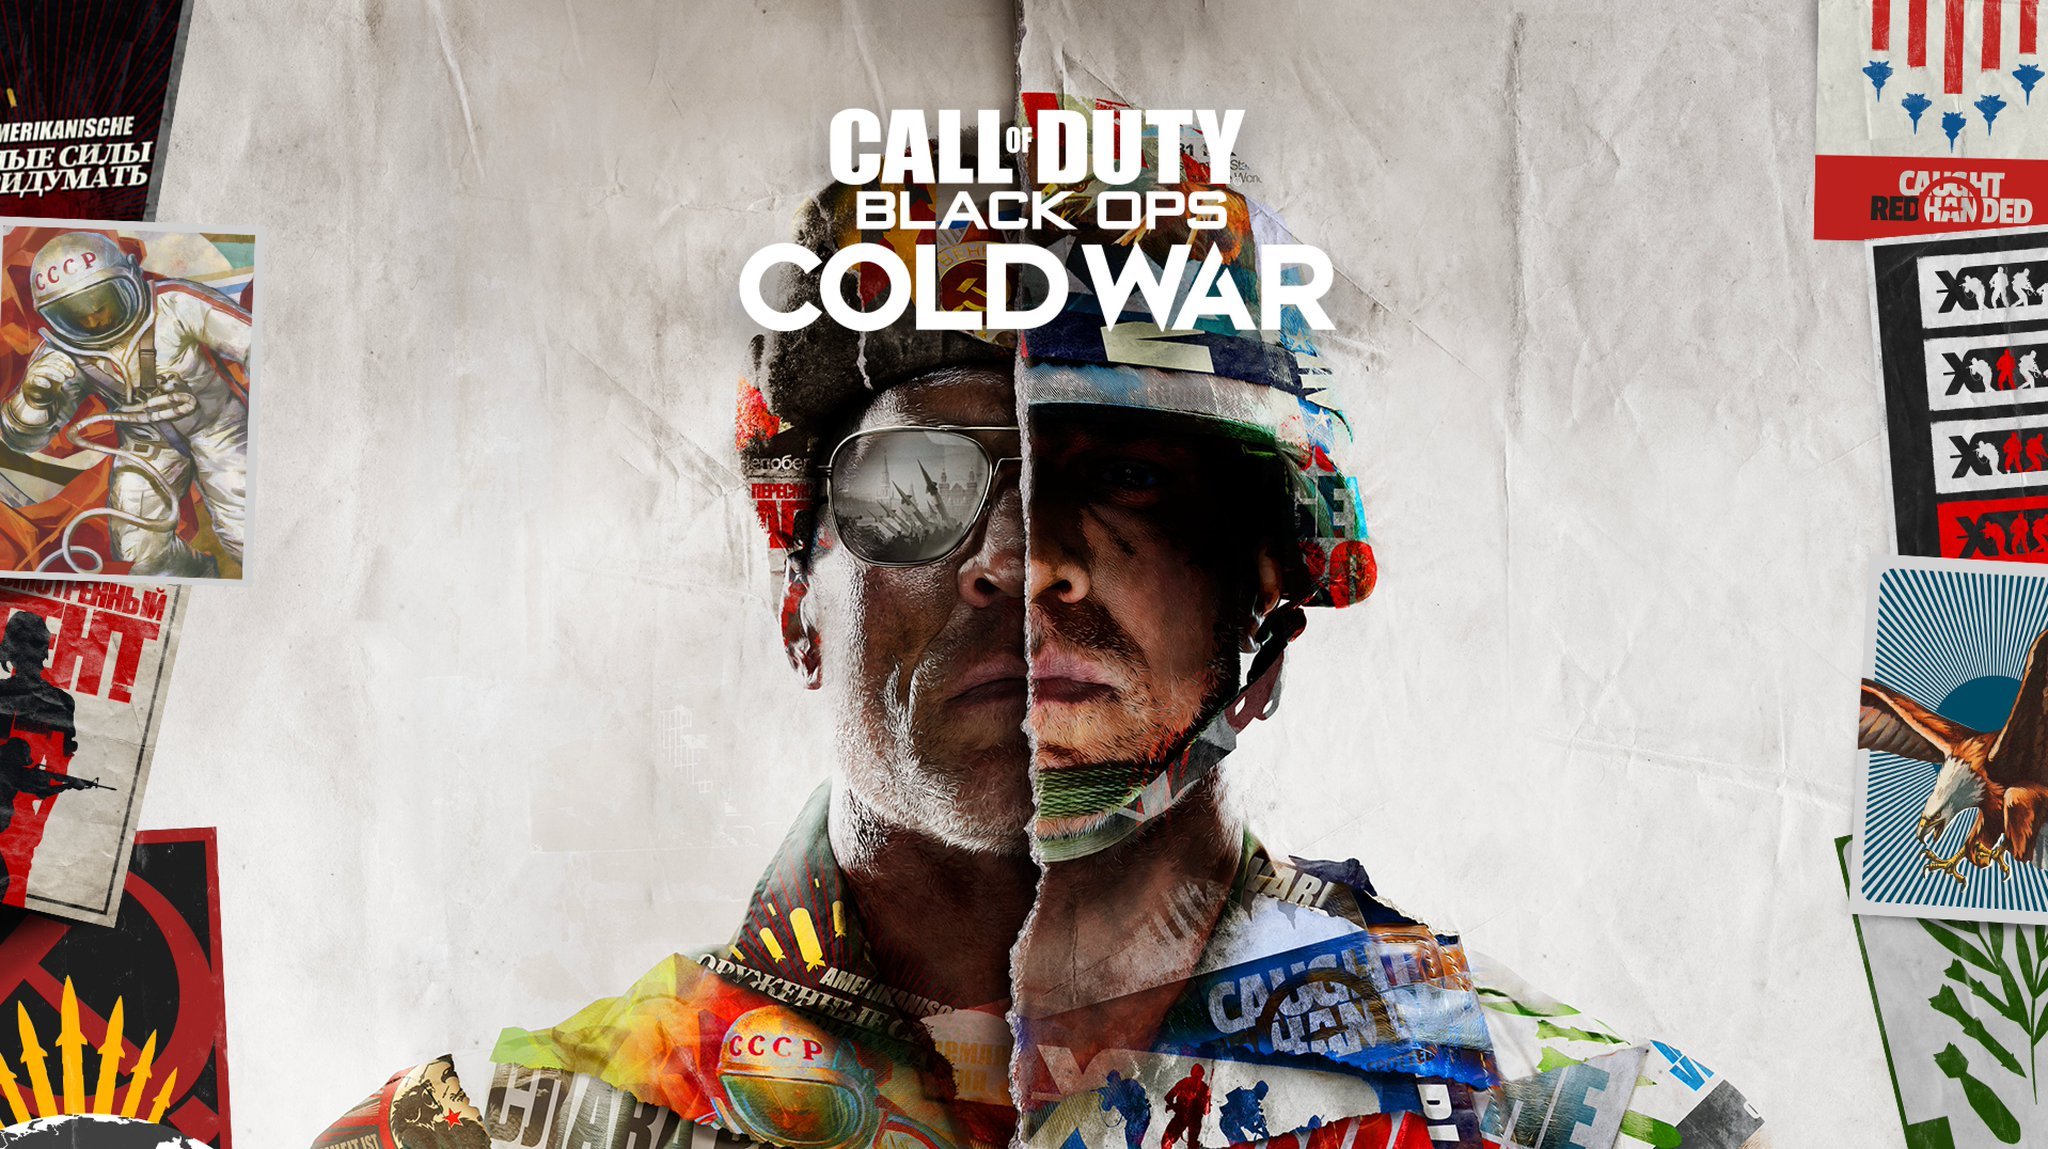 call-of-duty-black-ops-cold-war-cover-art.jpg